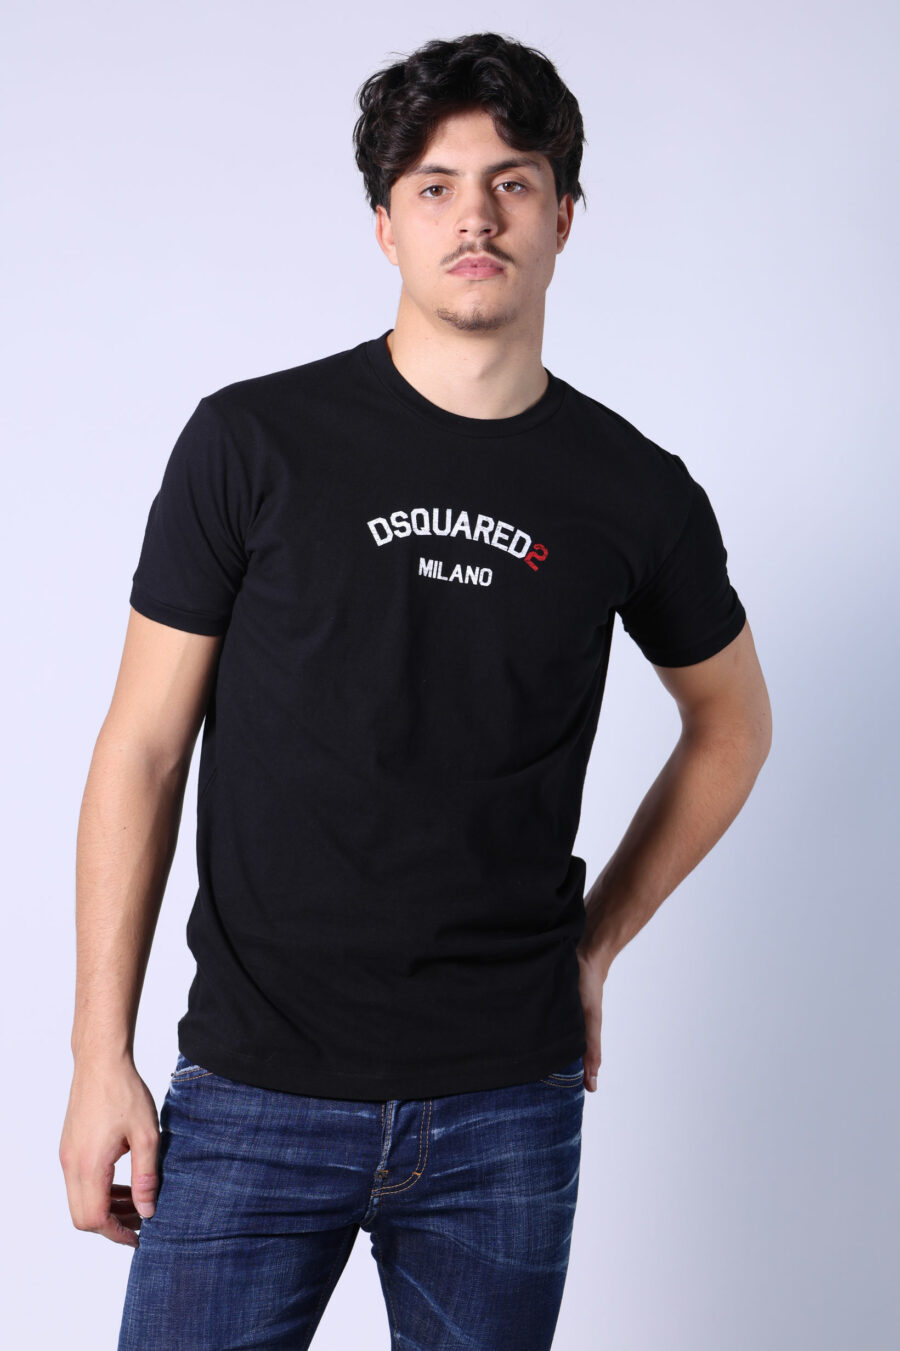 Black T-shirt with minilogue "dsquared2 milano" - Untitled Catalog 05472